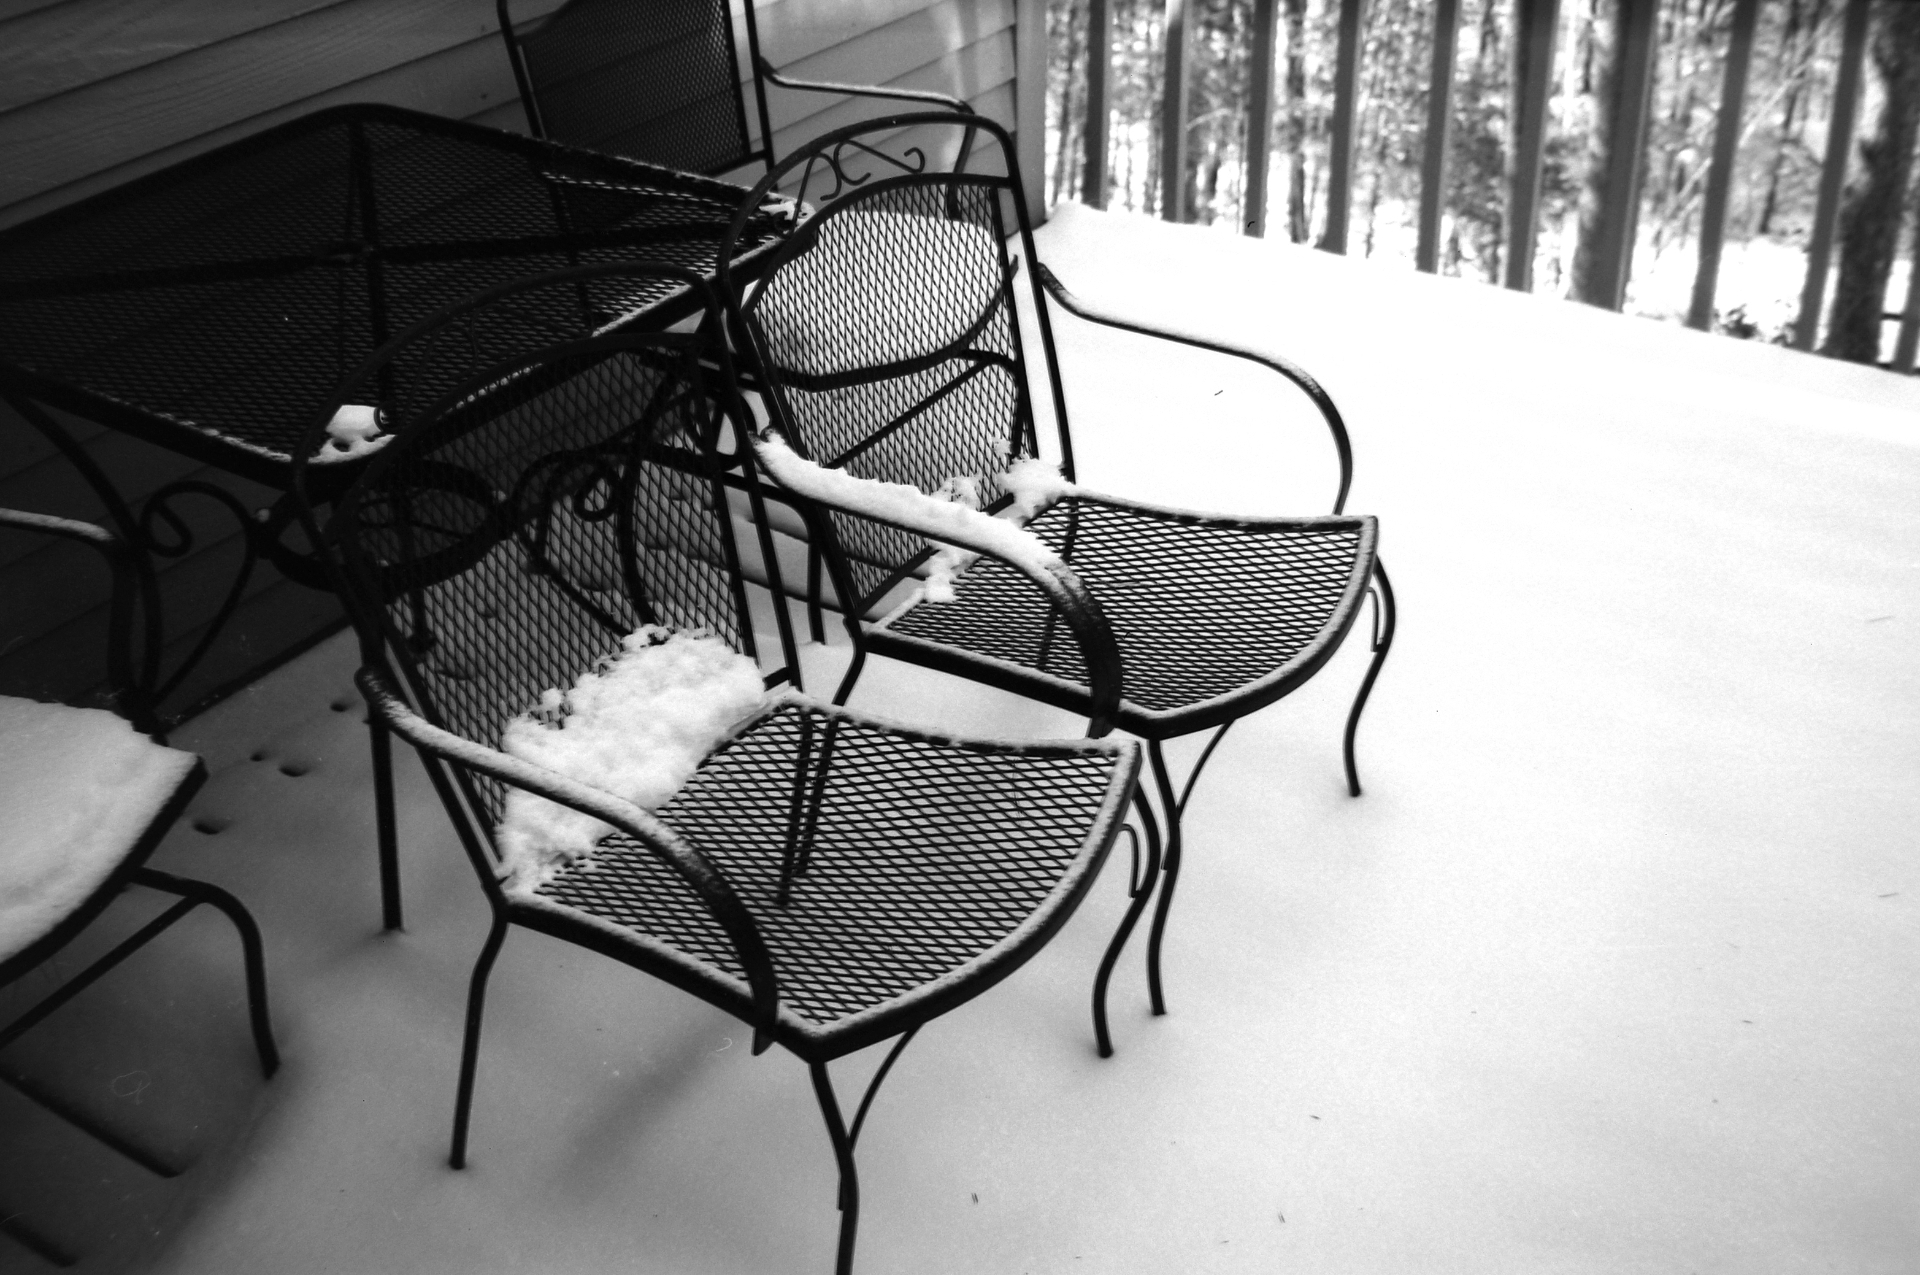 Snowy deck chairs